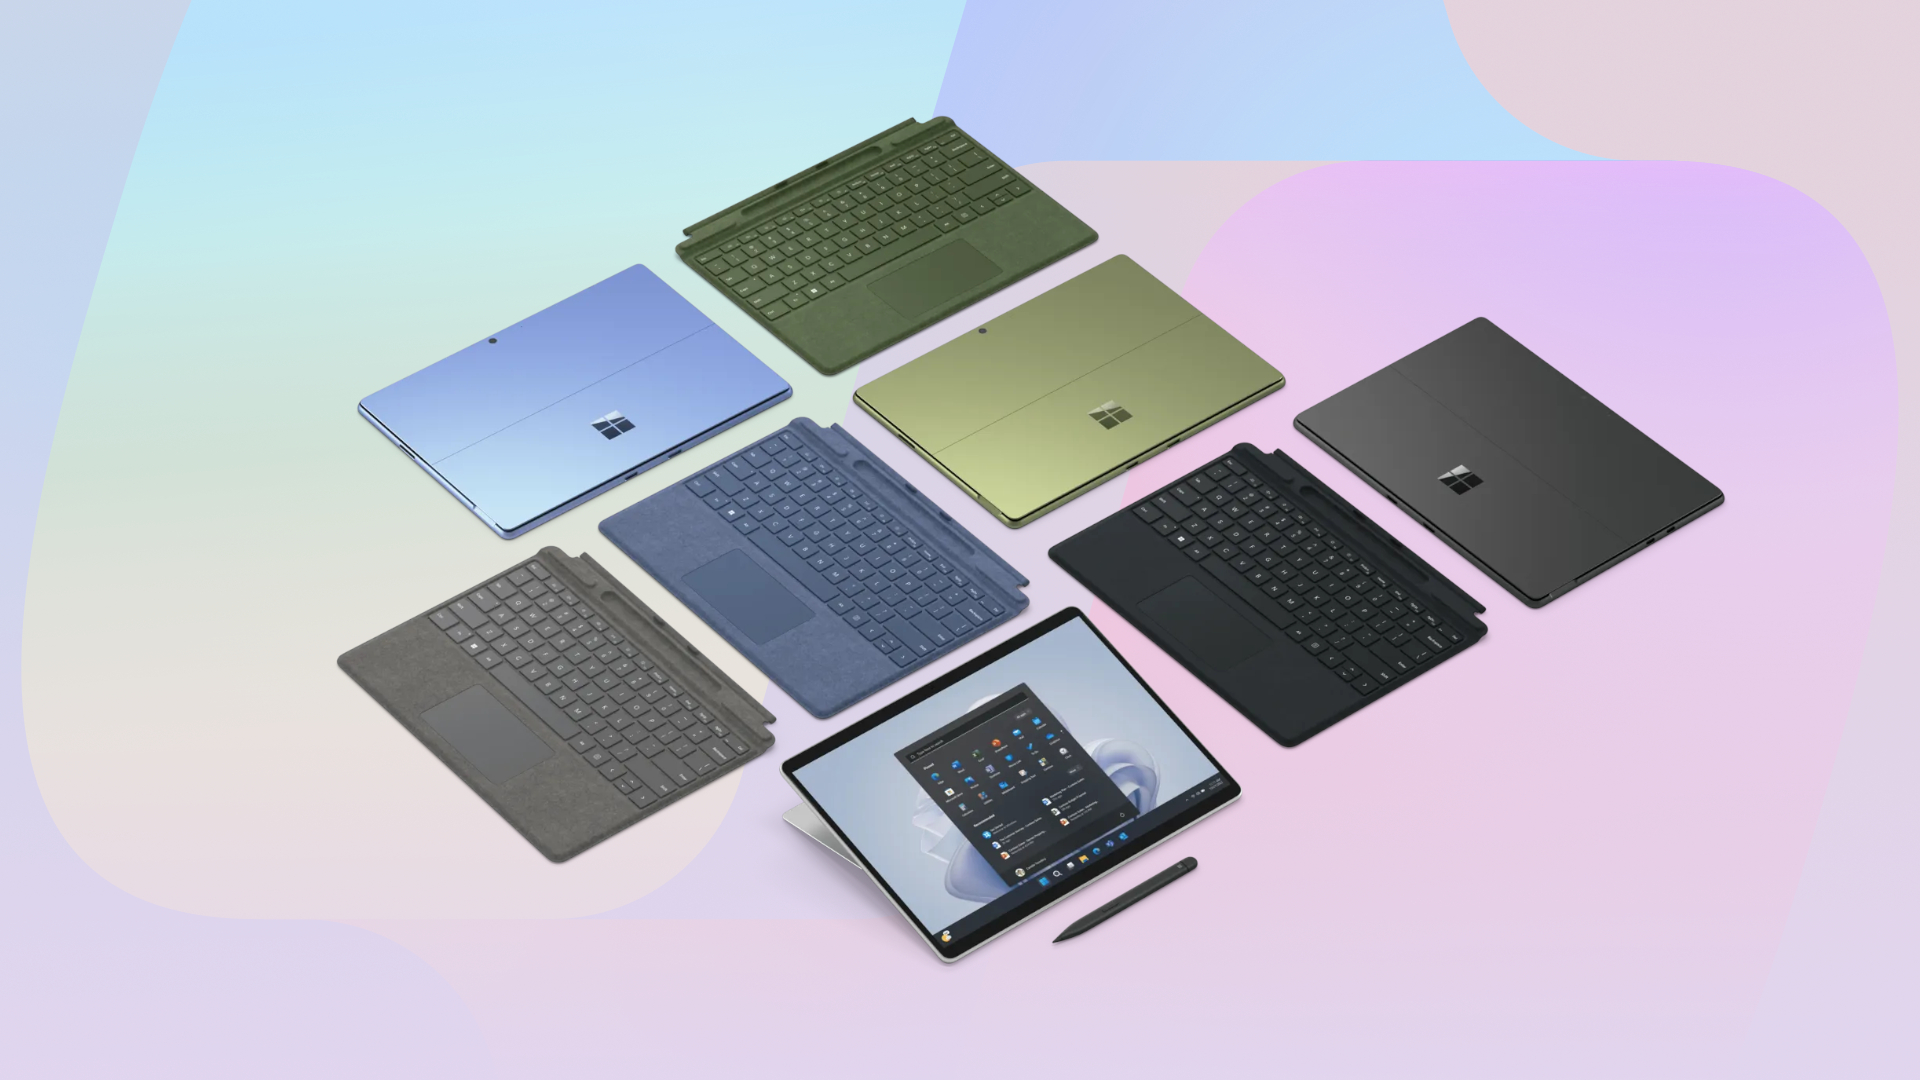 Microsoft Surface Pro 9 2-in-1 laptop detachable in various colors on a gradient background with a Microsoft Copilot logo overlay.